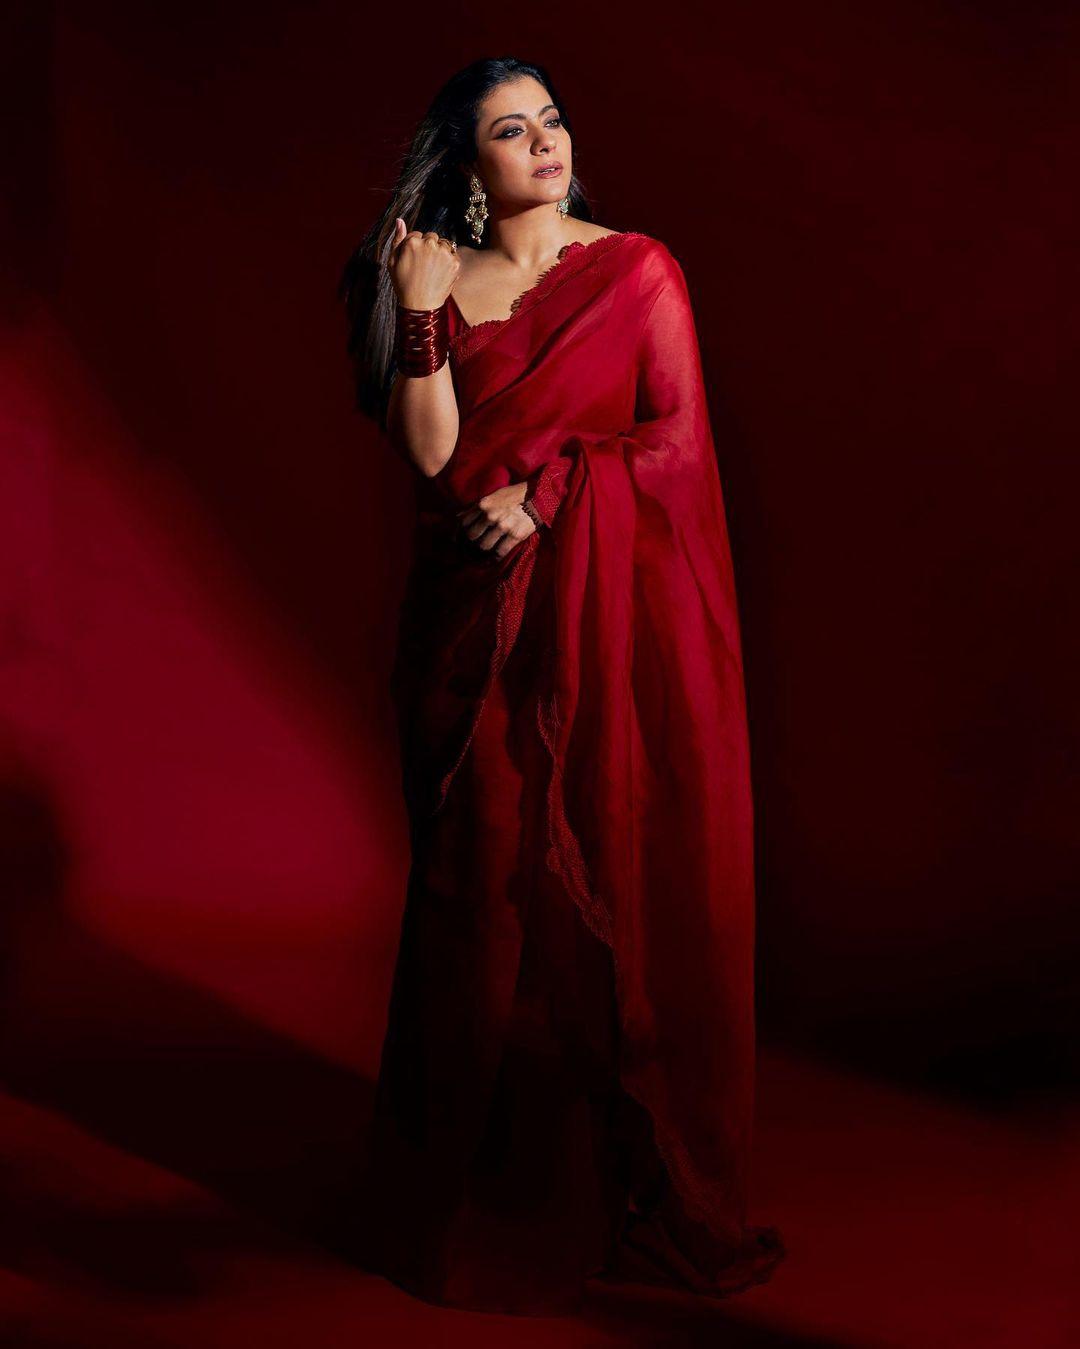 AshtamiOn Ashtami, as the festive excitement hits its peak, this outfit on Kajol makes for the perfect choice. She dons a stunning scarlet red saree, elegantly paired with a sleeveless blouse featuring a delicate scalloped border.